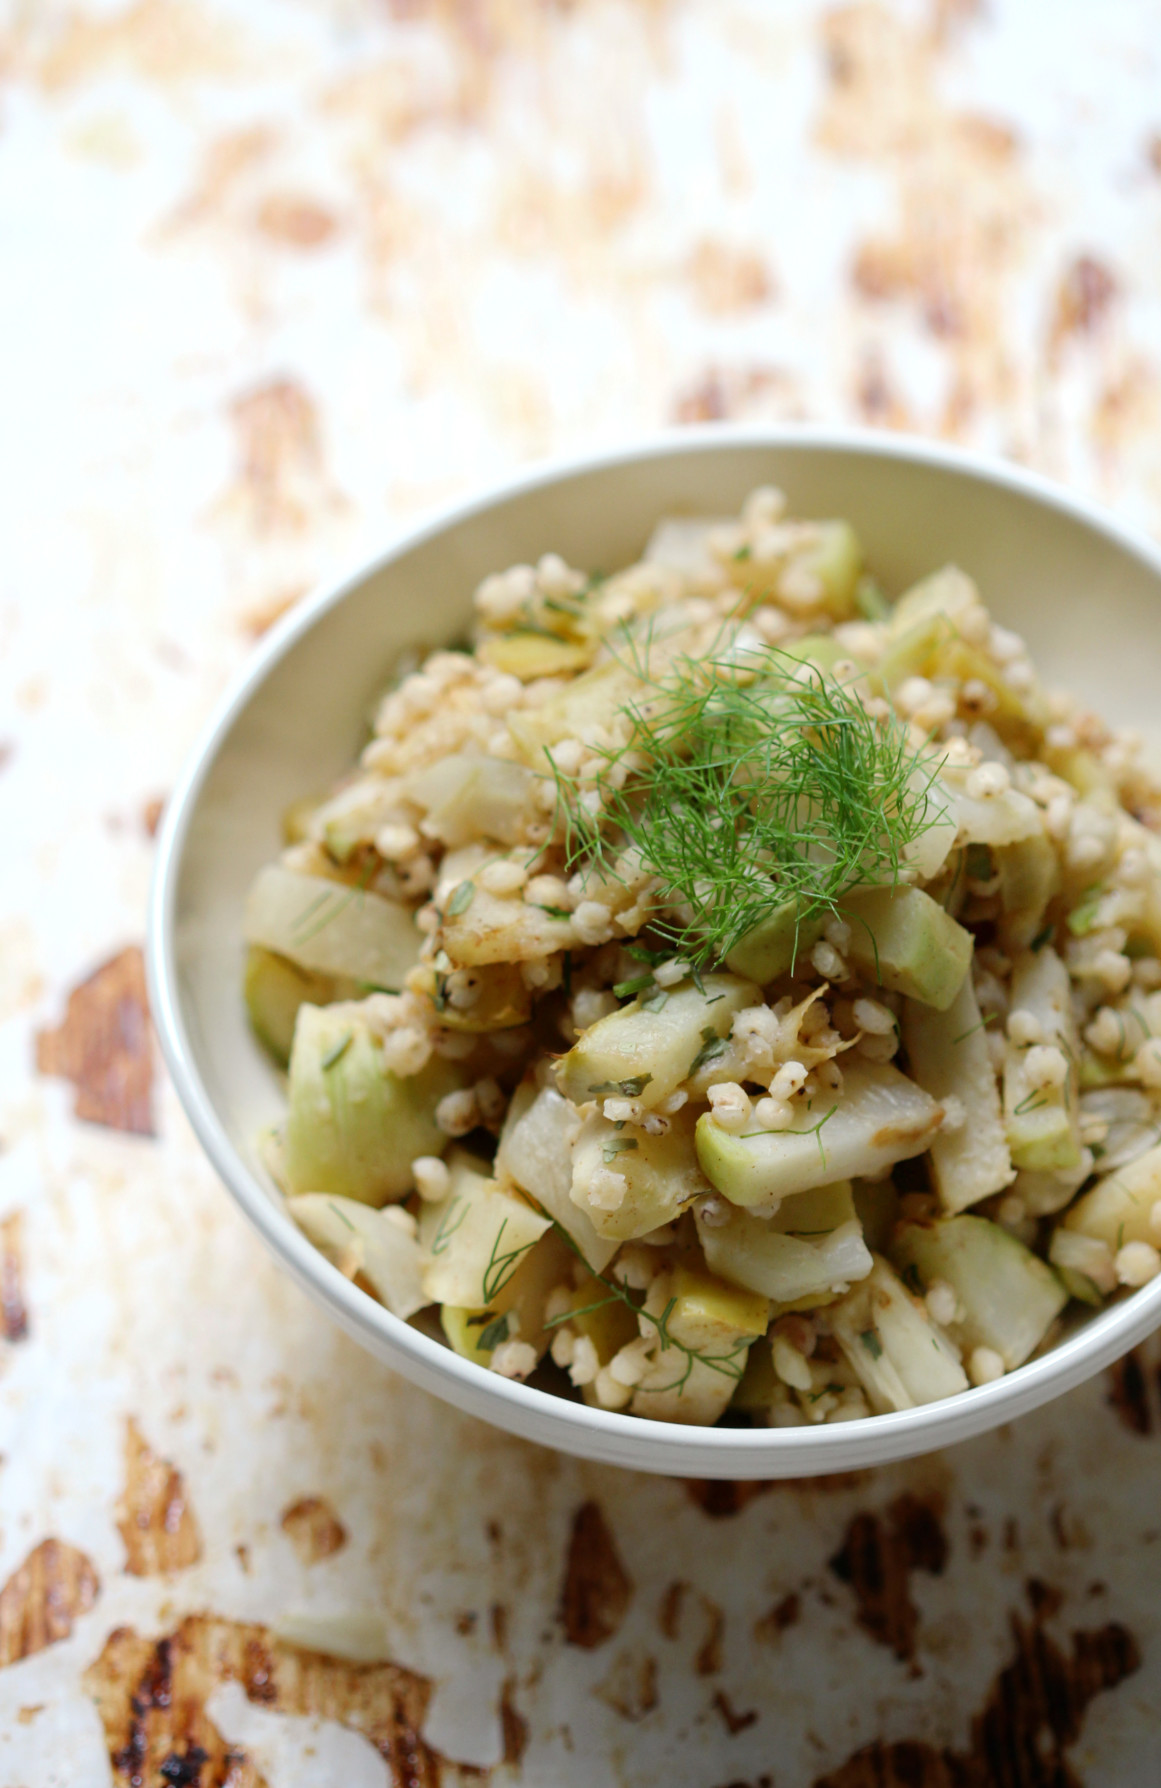 Warm Sorghum Salad with Roasted Kohlrabi, Apple, & Fennel | Strength and Sunshine @RebeccaGF666 A warm sorghum salad paired with roasted kohlrabi, ginger gold apple, and fennel. This gluten-free vegan recipe is slightly sweet, comforting, and nourishing for the cold months ahead. A perfect healthy whole grain side dish.